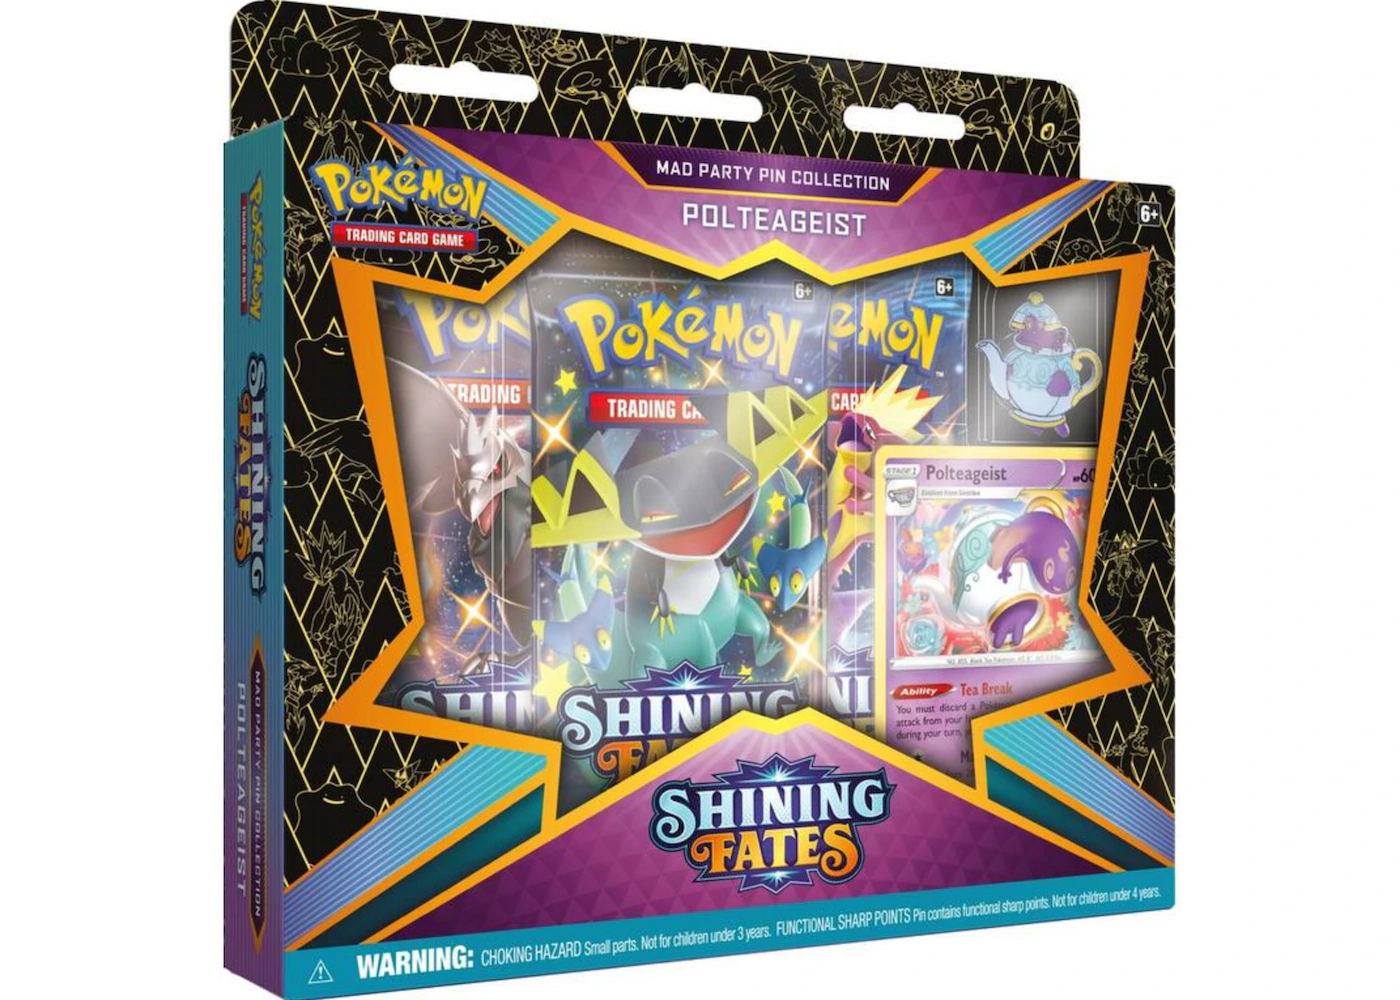 Pokémon TCG Sword & Shield Shining Fates Mad Party Pin Collection  Polteageist